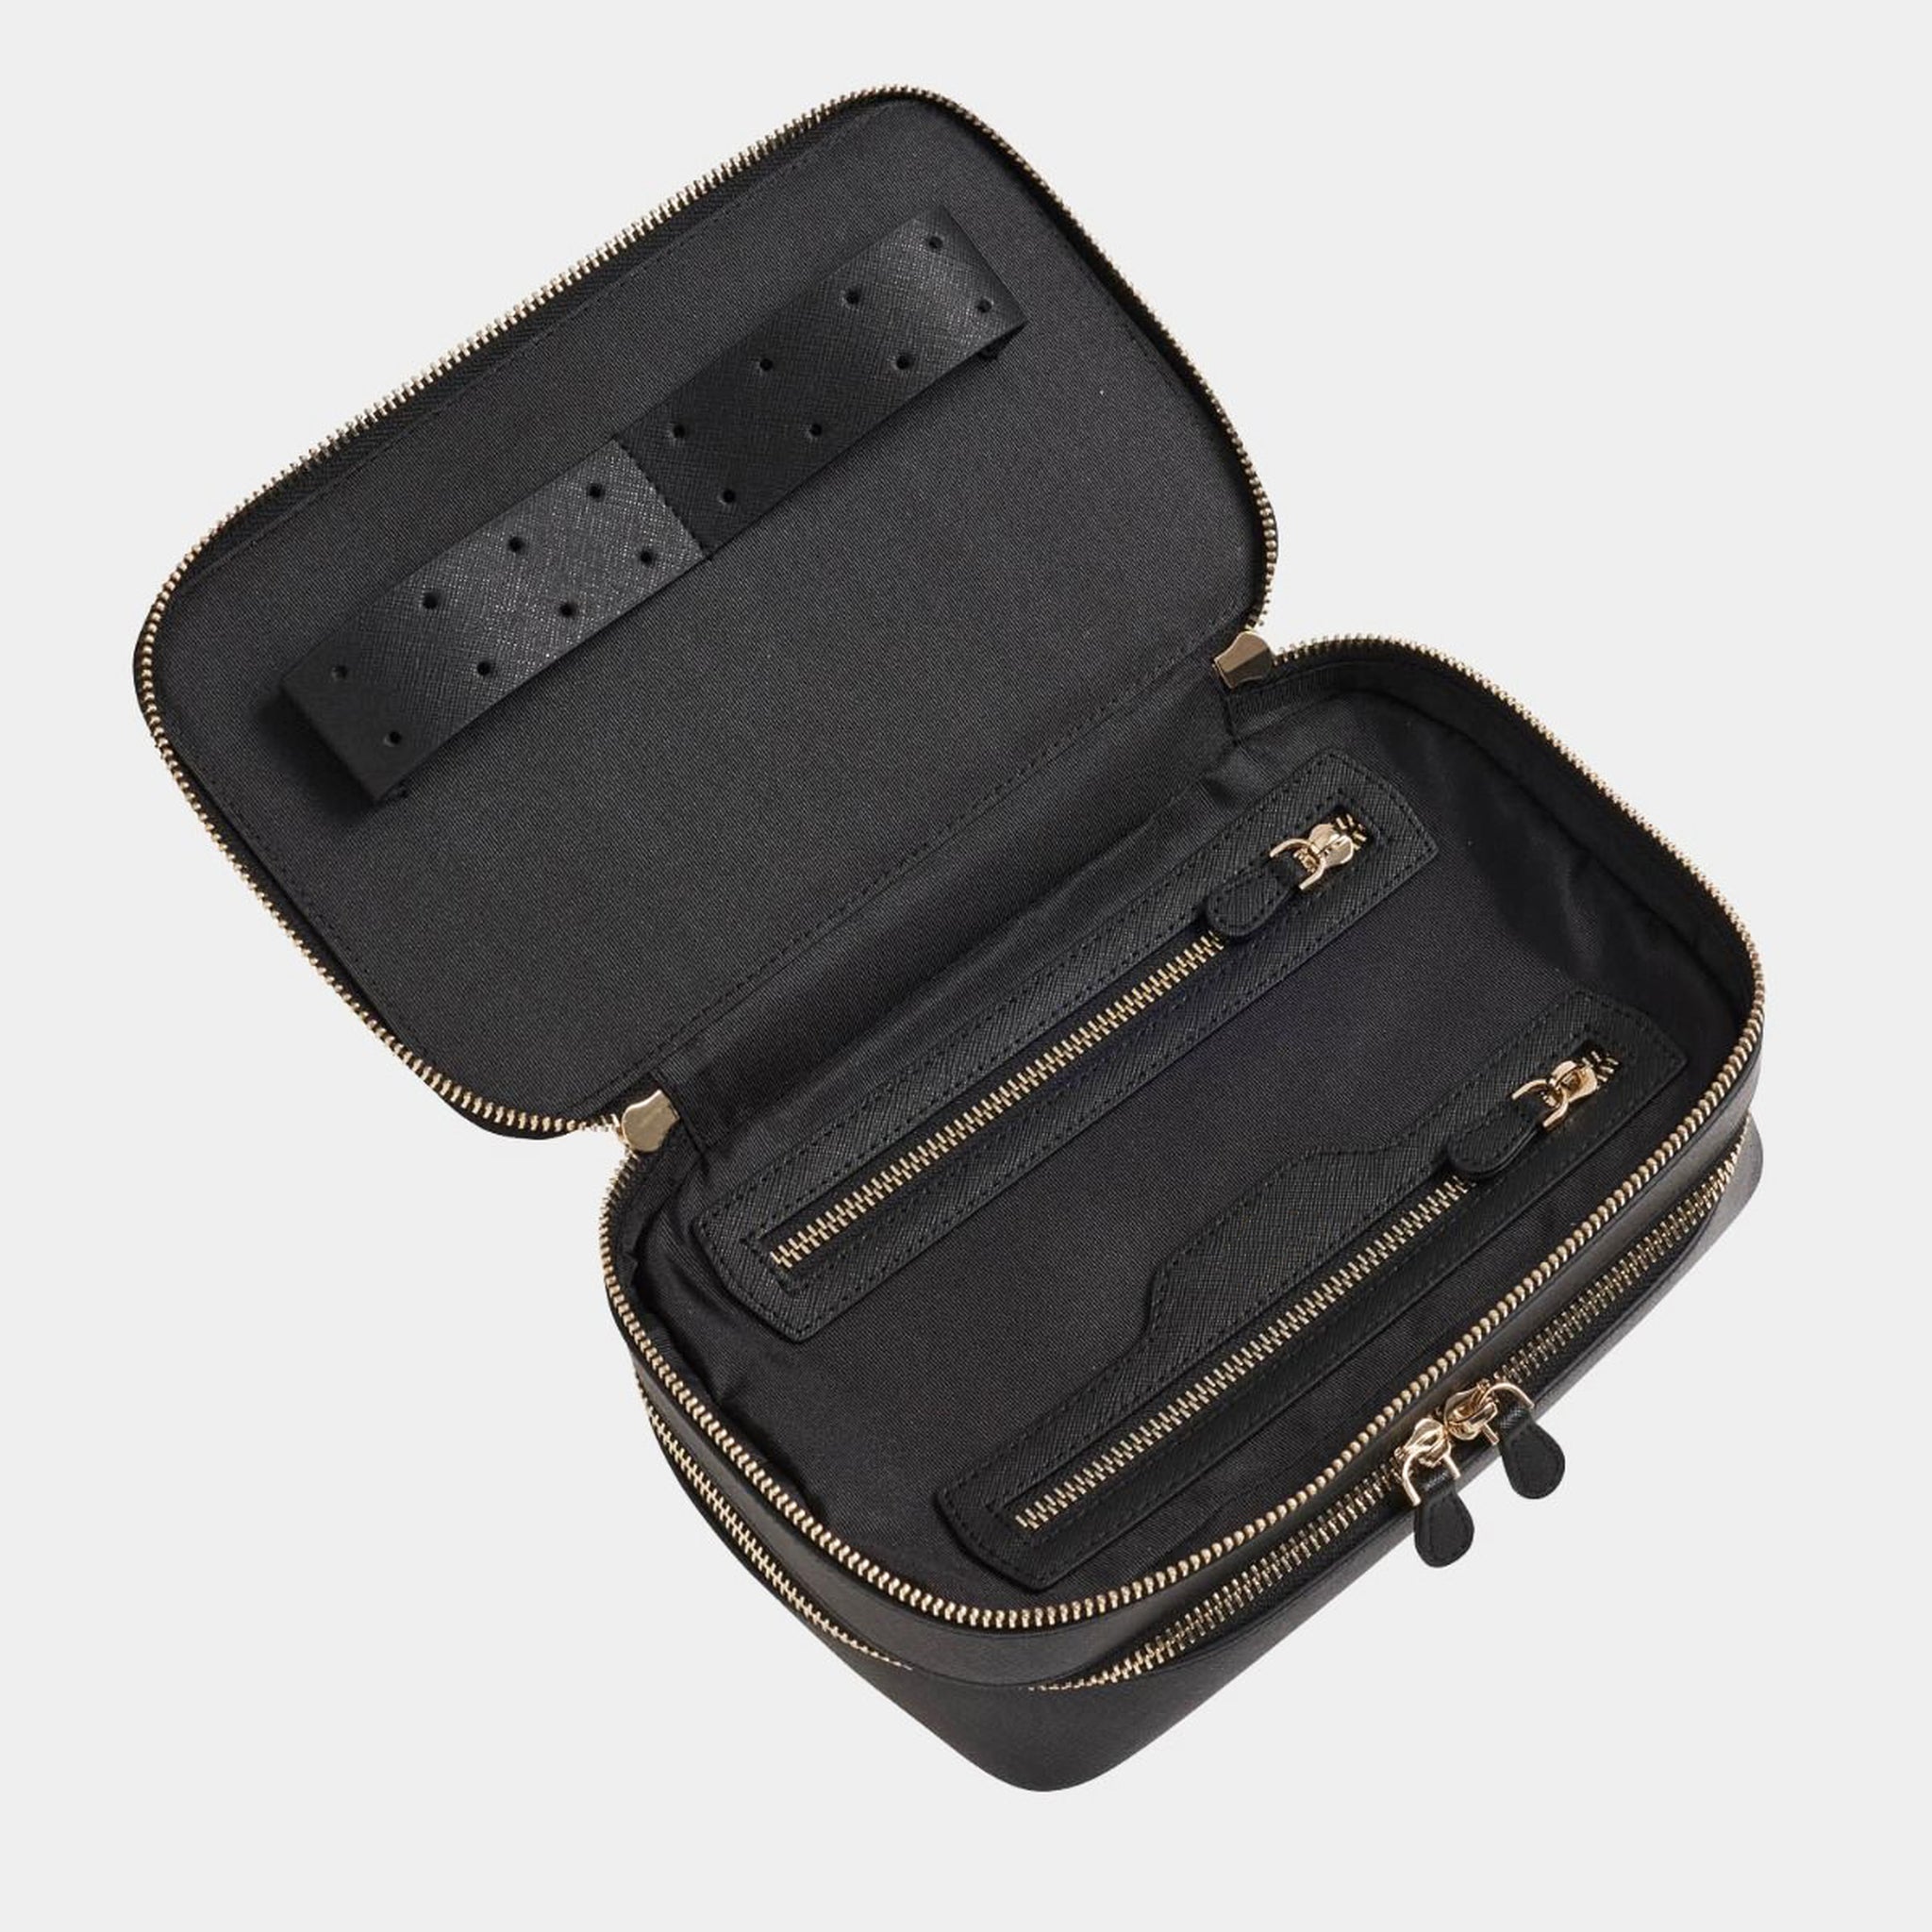 Genuine Leather Structured Travel Case